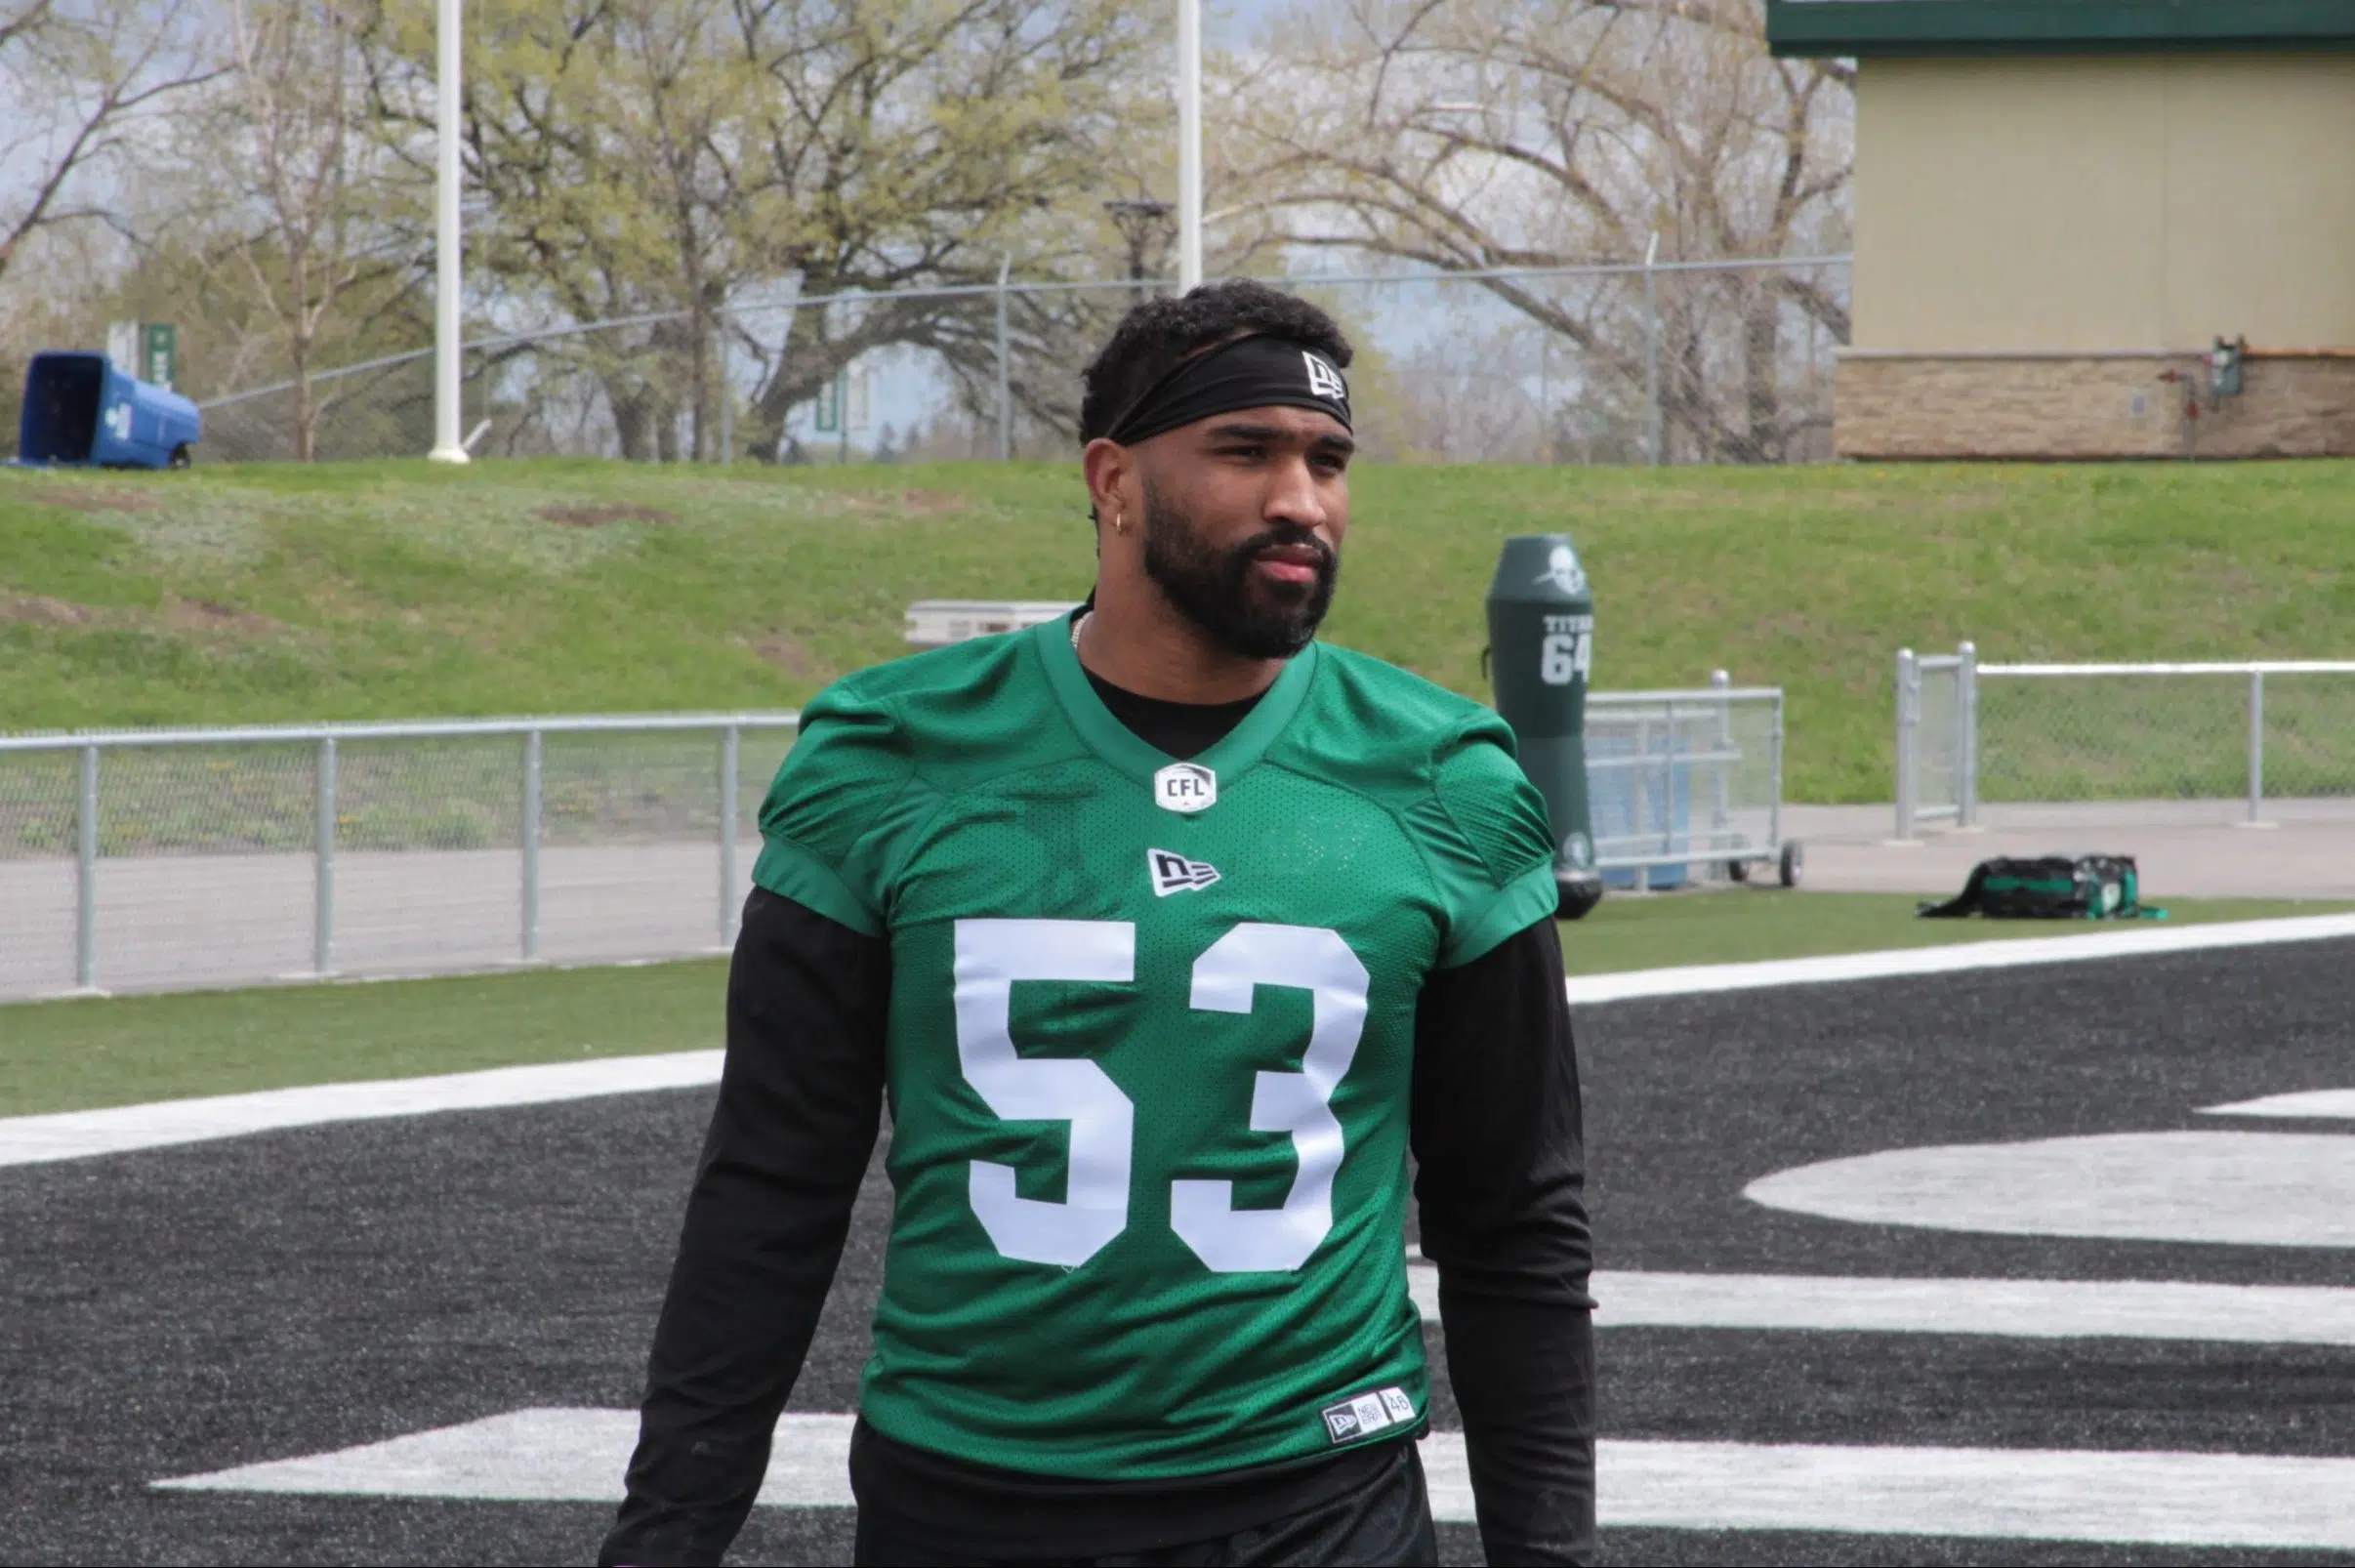 Moncrief, Sankey ready to make big impact with Riders